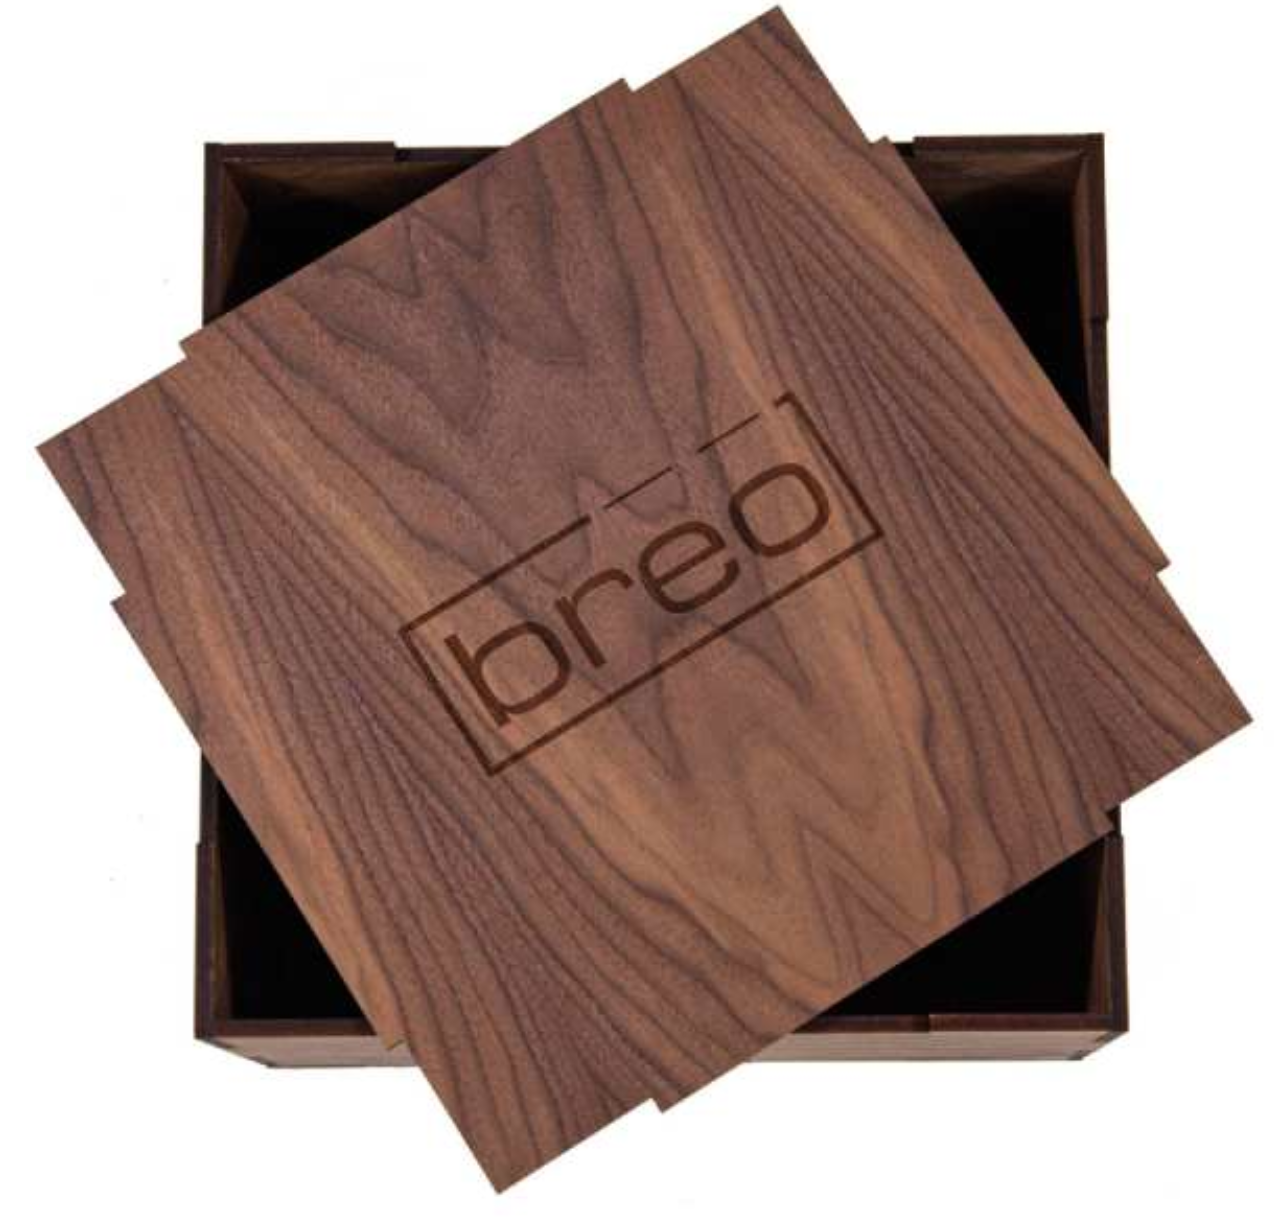 Limited Edition Anniversary Breo Box Available Now + Spoilers! MSA